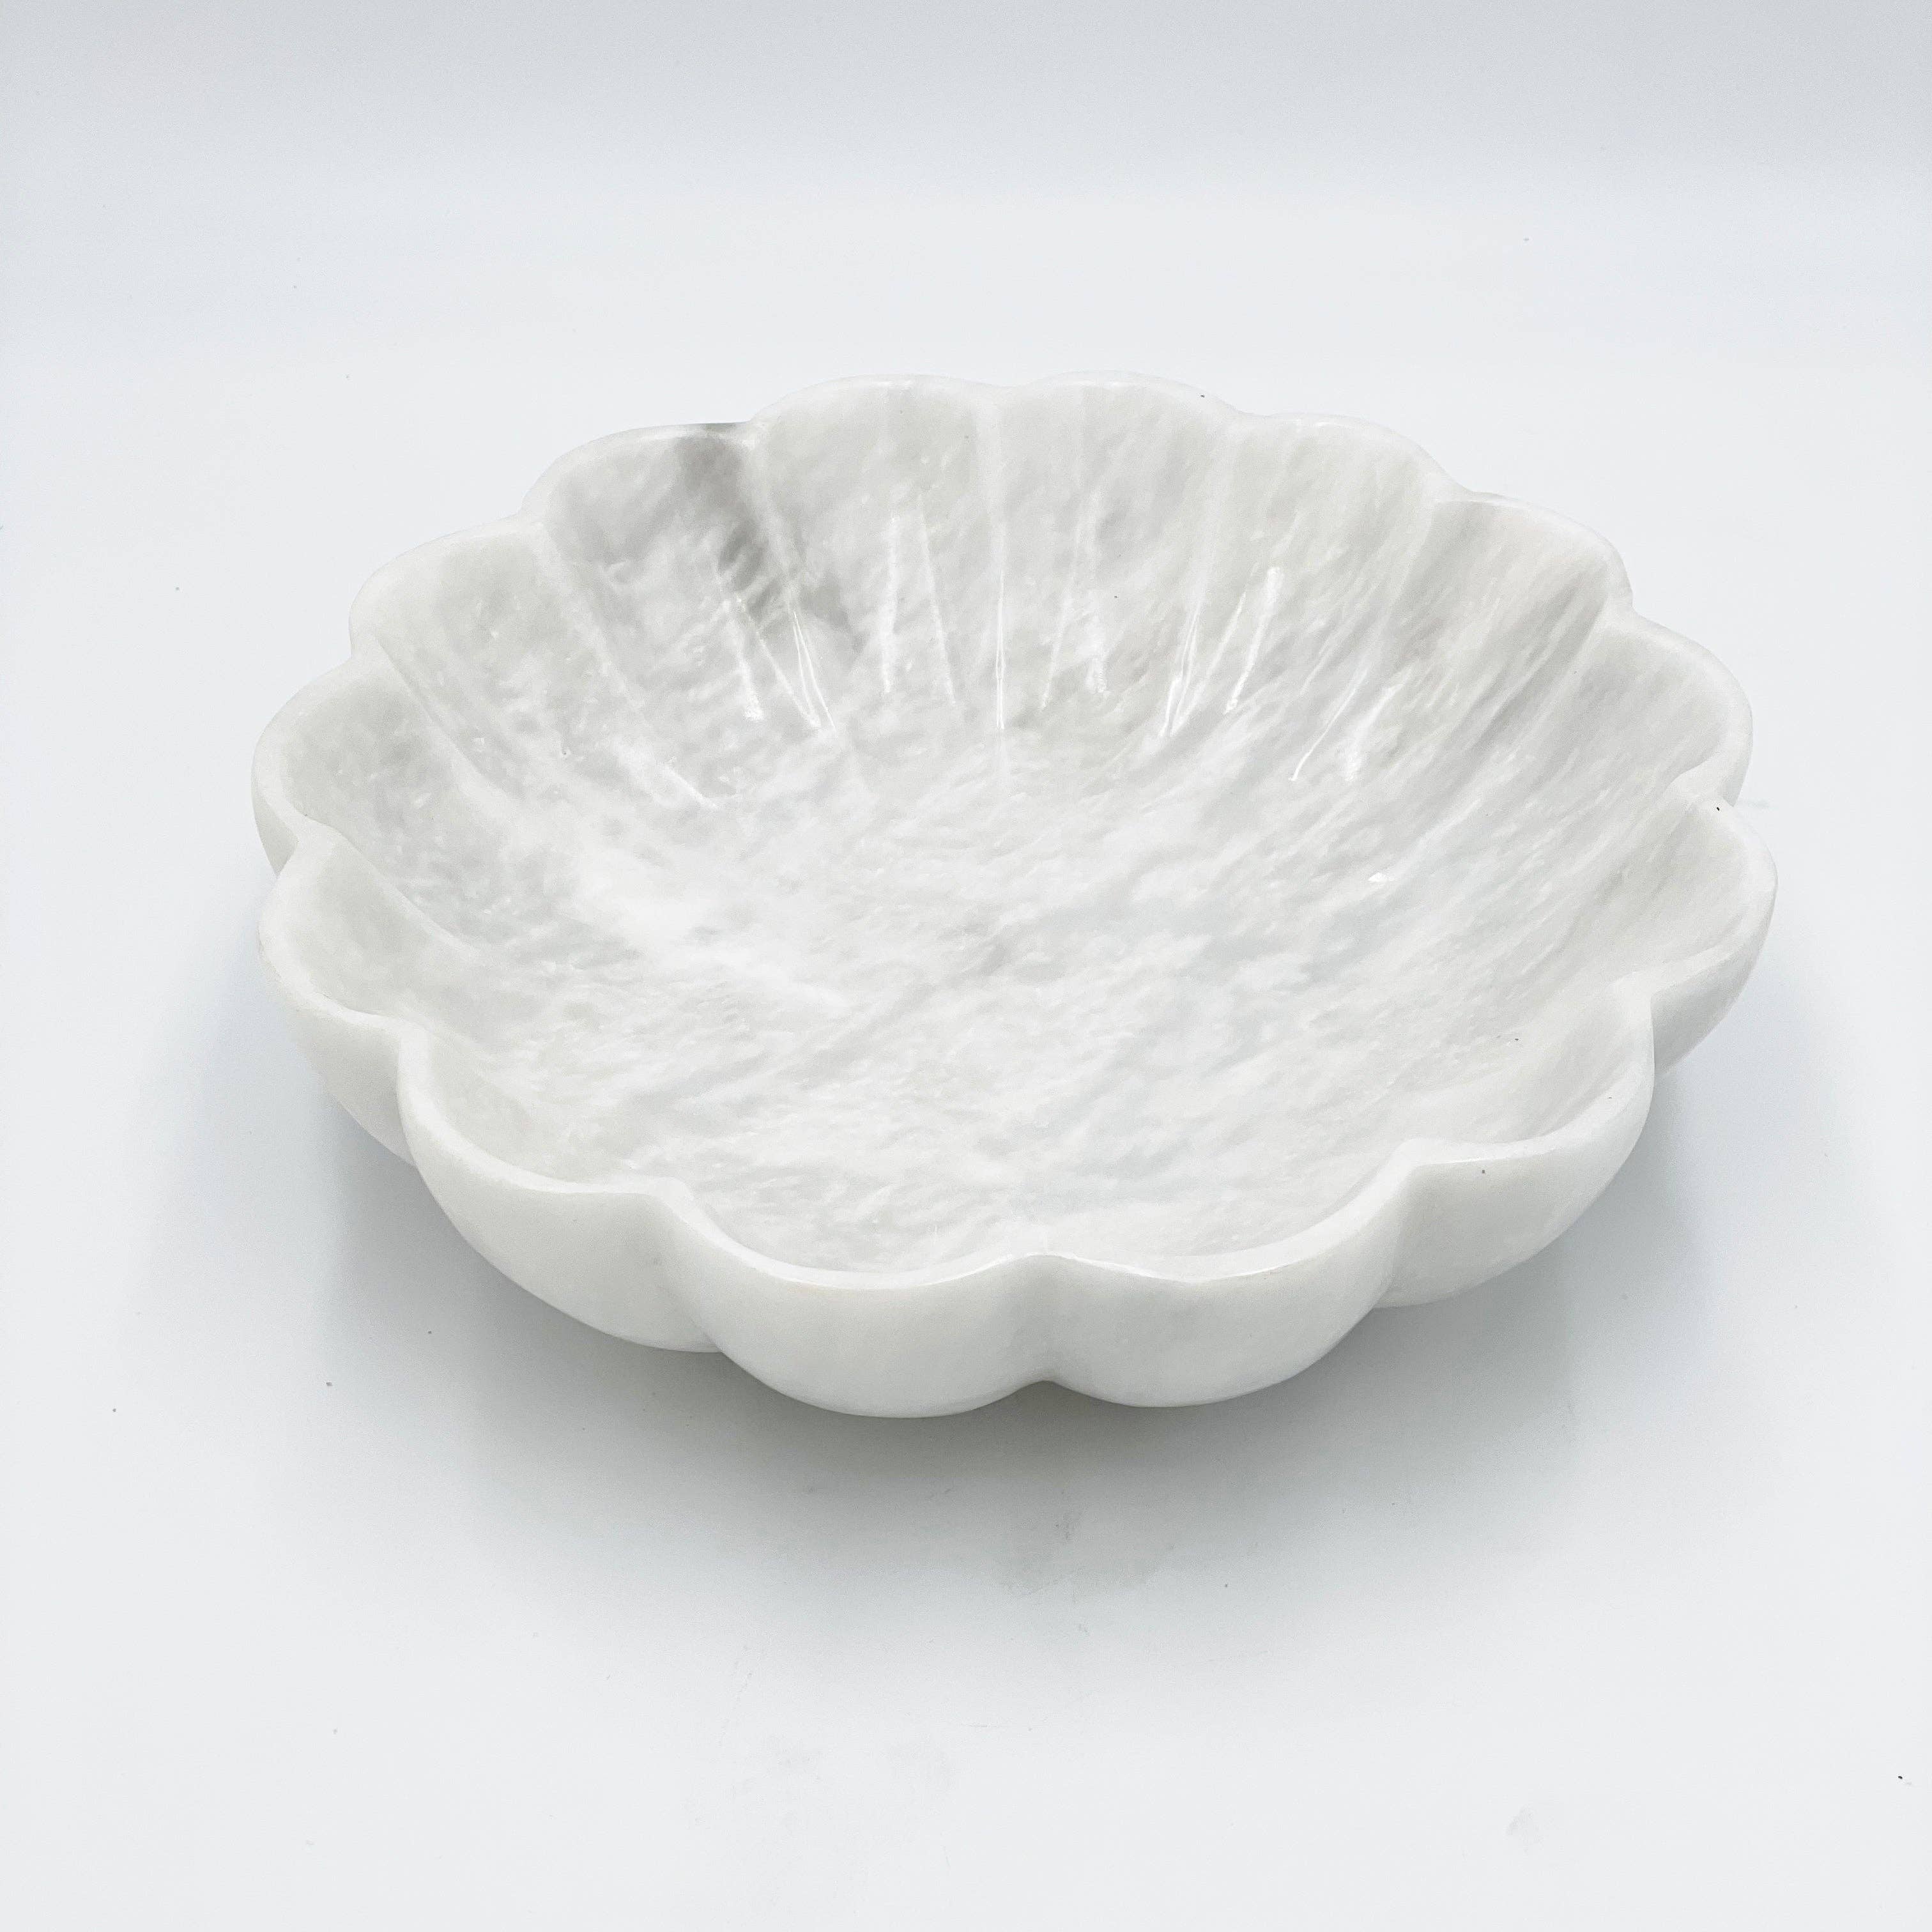 Hand-carved Bowl in Marble and Onyx: Verona Marble